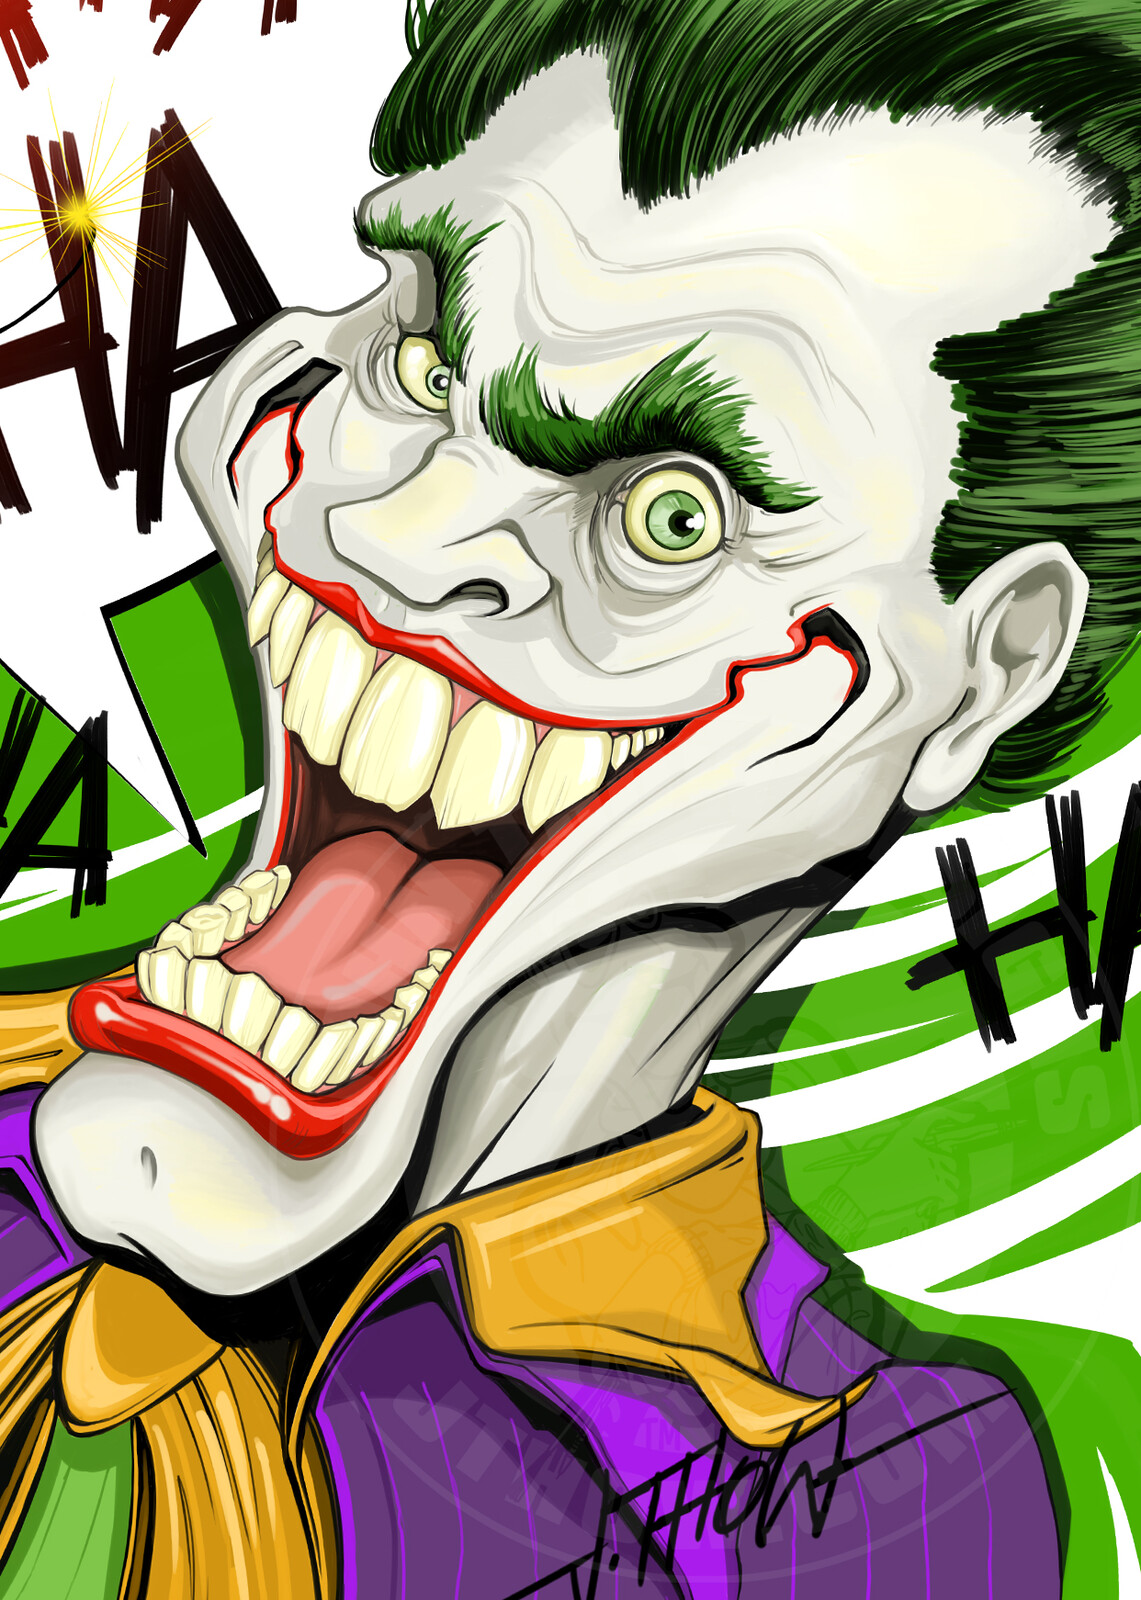 "You'll Get a Bang Out of This One!" Joker detail